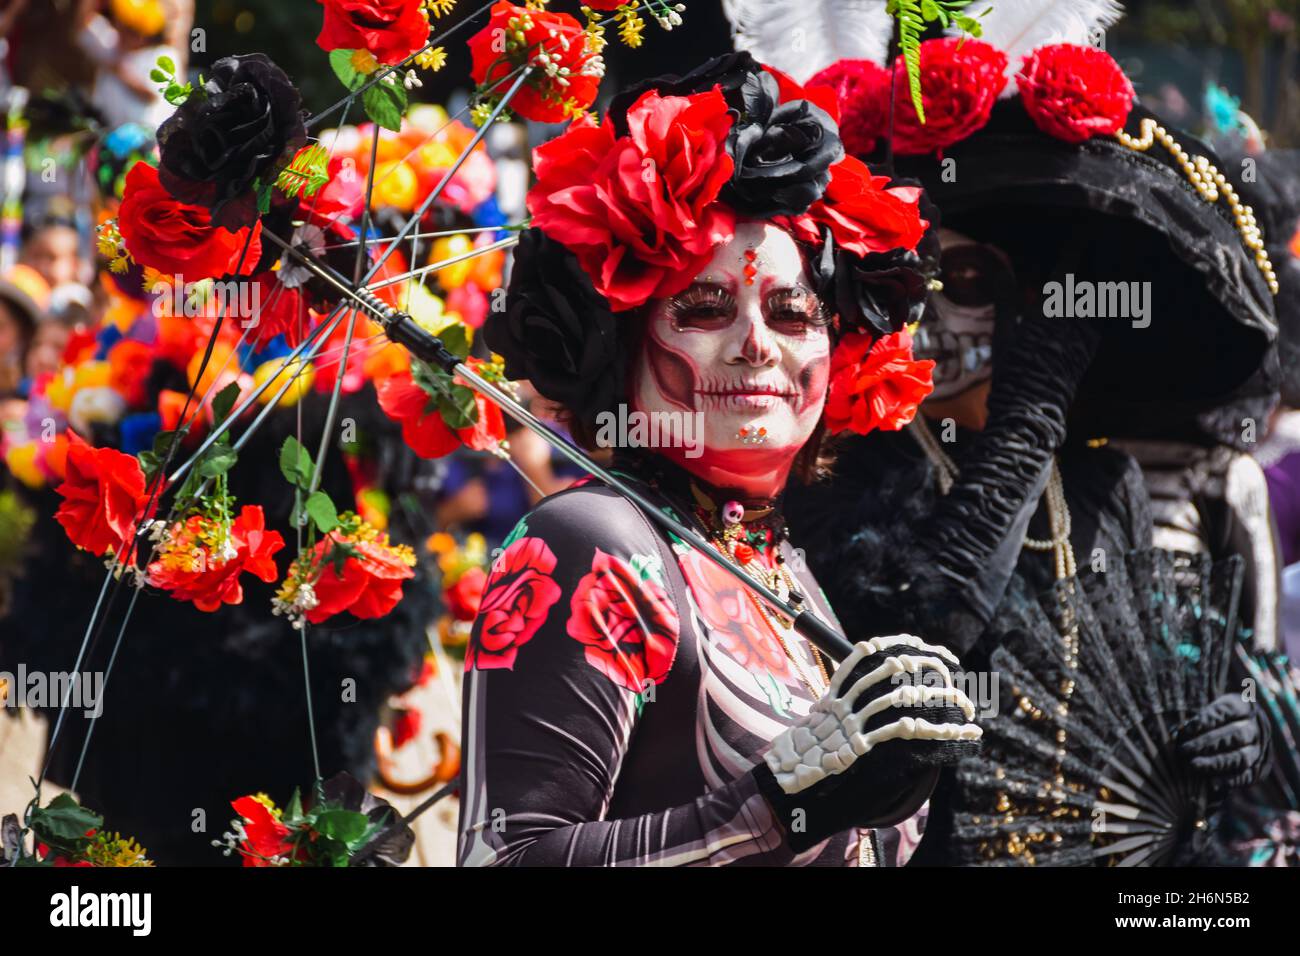 Mexico City, Mexico ; October 31 2021:  Day of the Dead, people in disguise representing catrina during the Day of the Dead parade Stock Photo